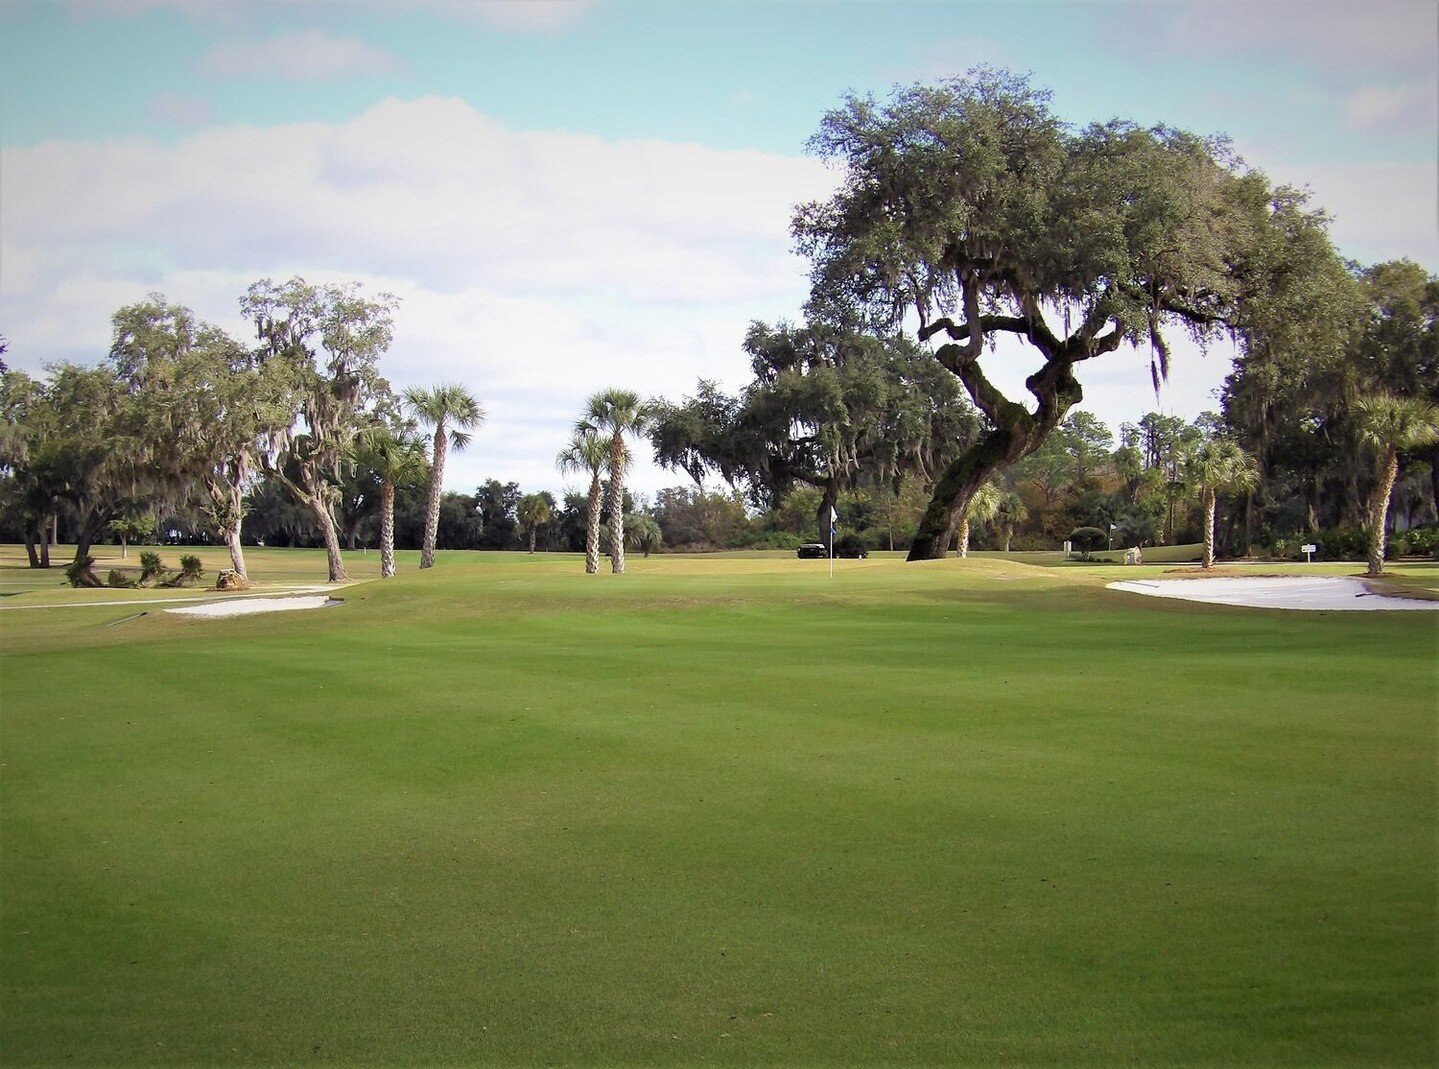 DTE Golf has managed the Duval/Double Palms Executive Golf Facility for 14 years with the same business strategy and principles that have made us successful for 30 years!

For more information on the courses we've managed, check out our website. Link